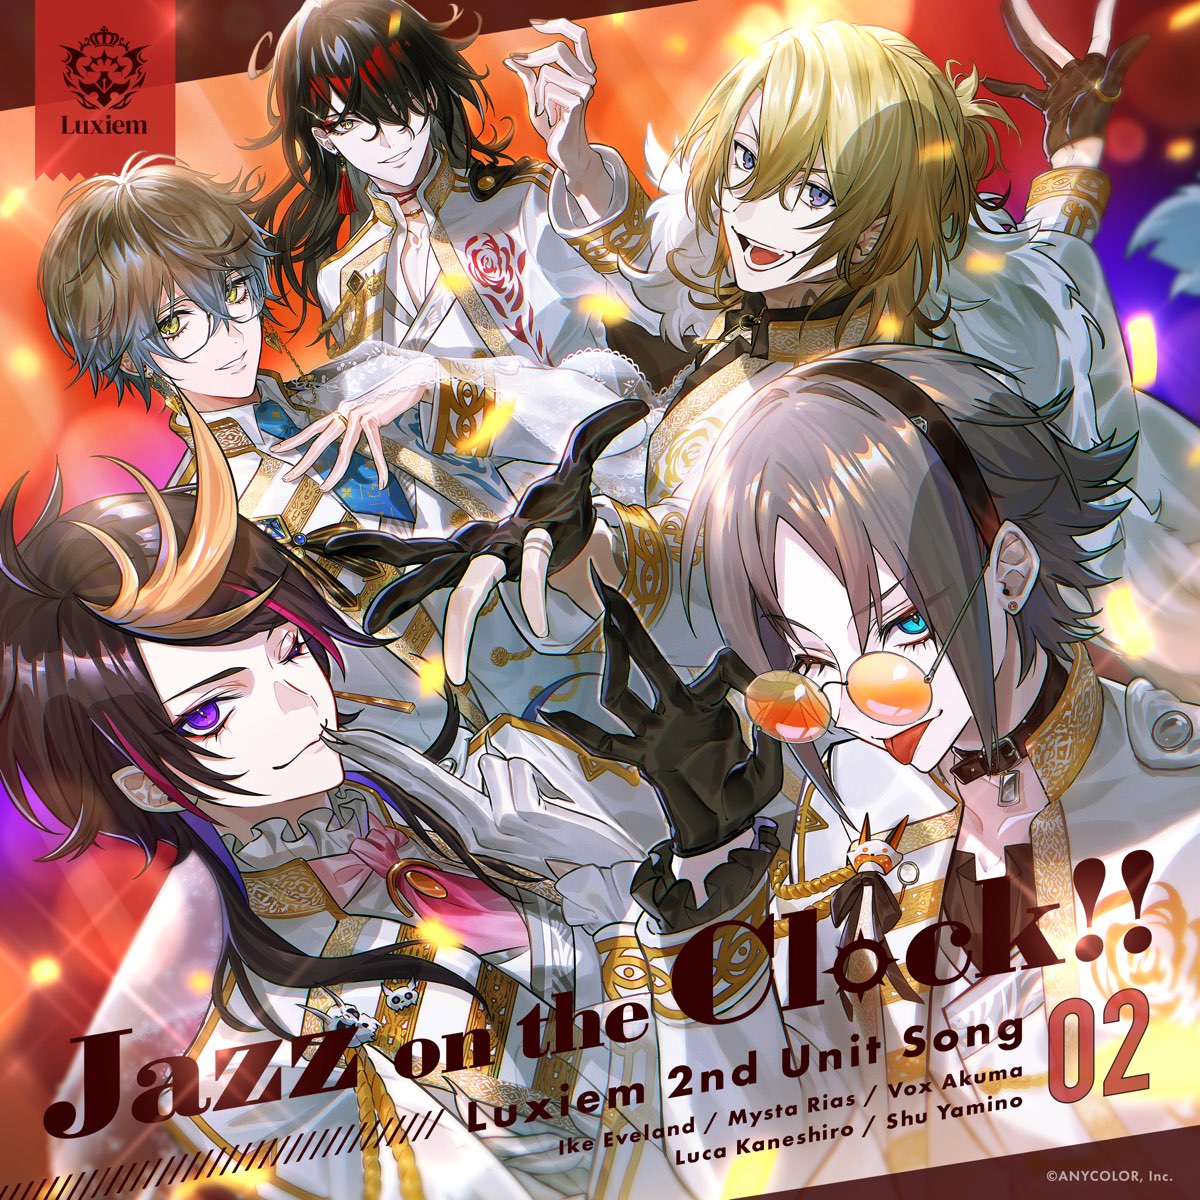 Luxiemの「Jazz on the Clock!! - Single」